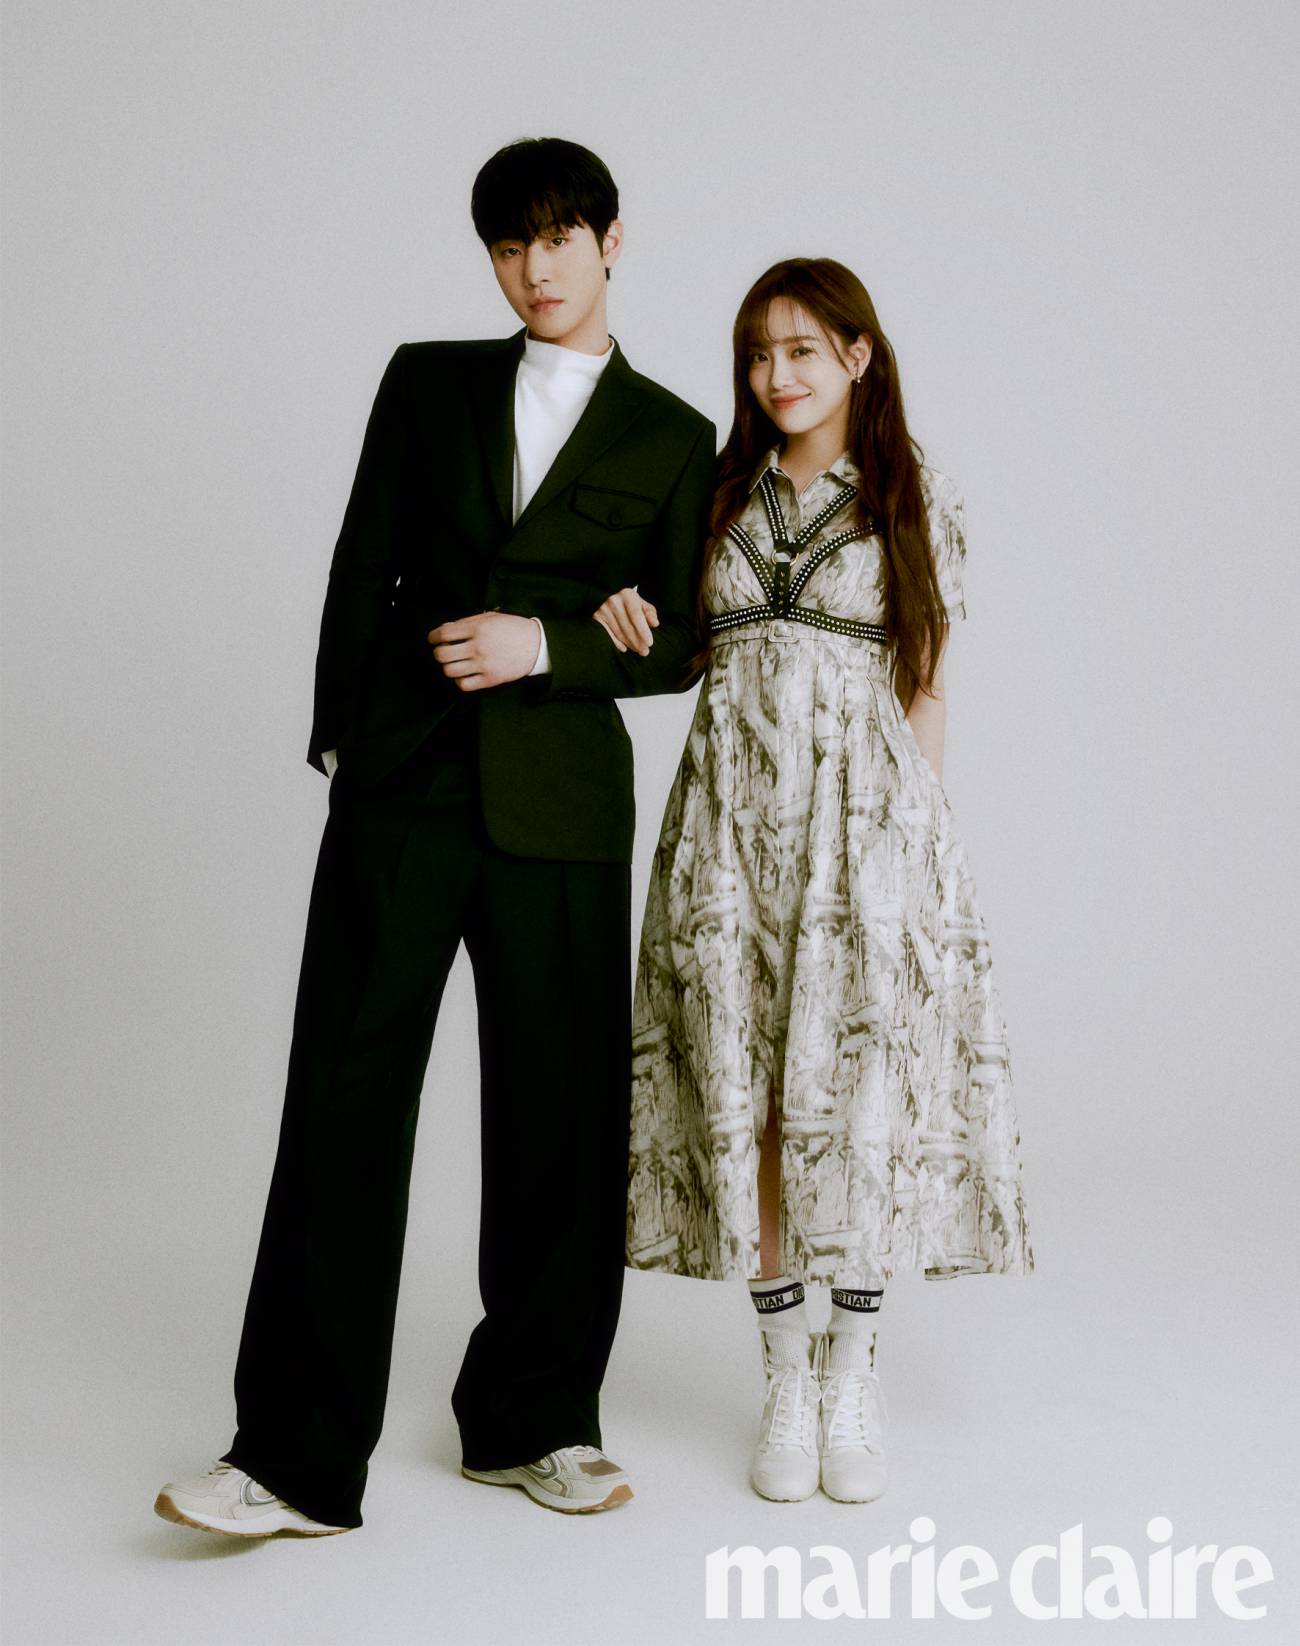 A Business Proposal' Ahn Hyo Seop and Kim Se Jeong Show Off Their Chemistry in the Recent Pictorial